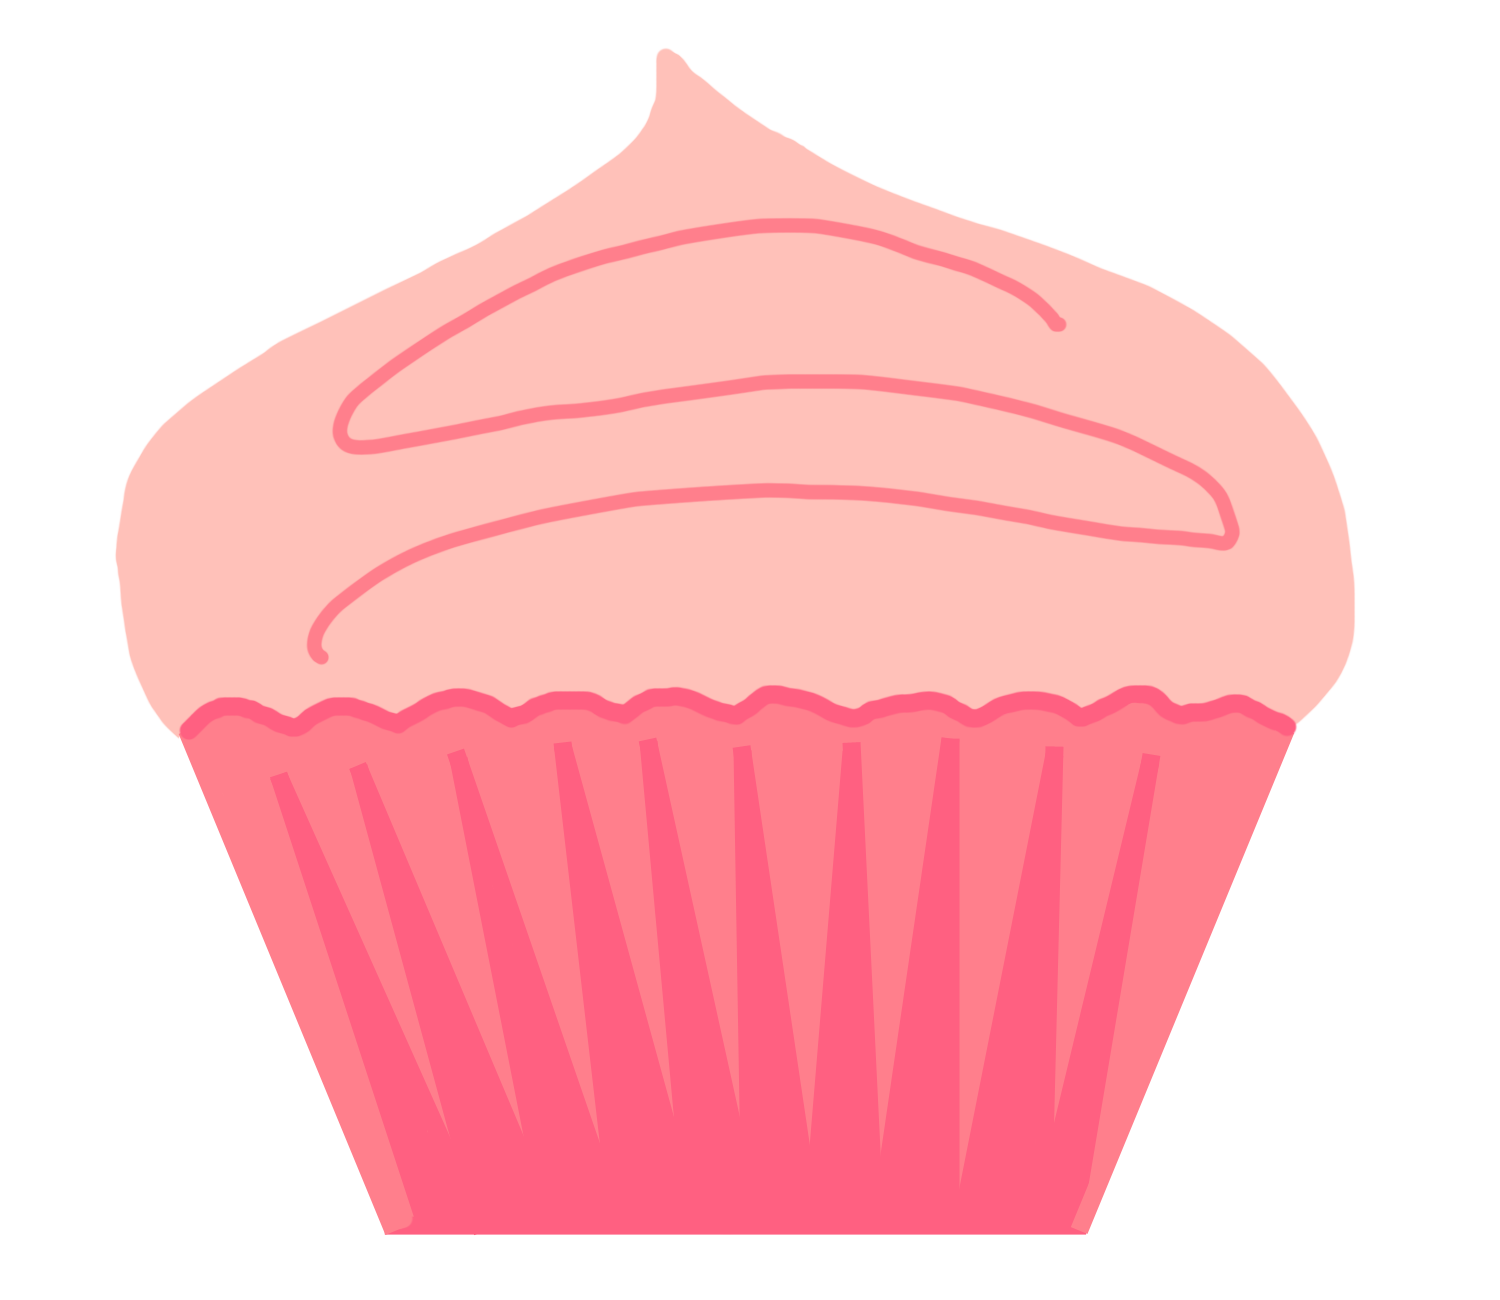 Desserts clipart tower. Cupcake preview panda free